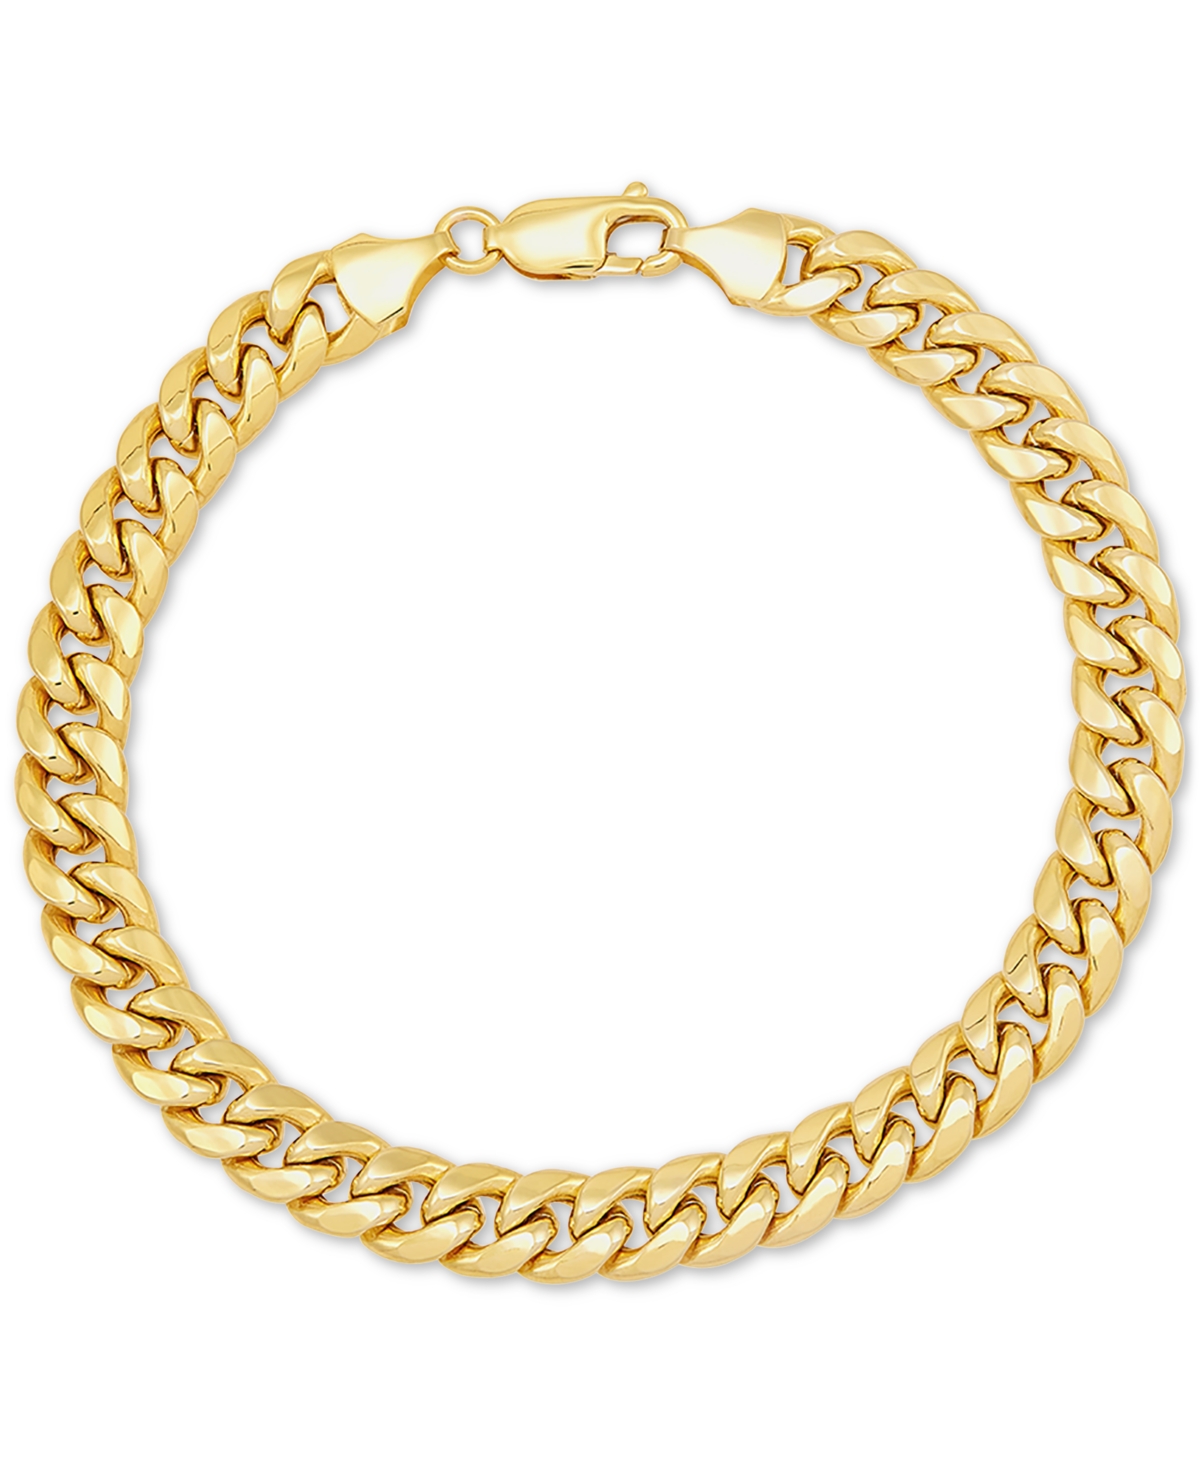 Miami Cuban Link 7-1/2" Chain Bracelet (7mm) in 10k Gold - Yellow Gold